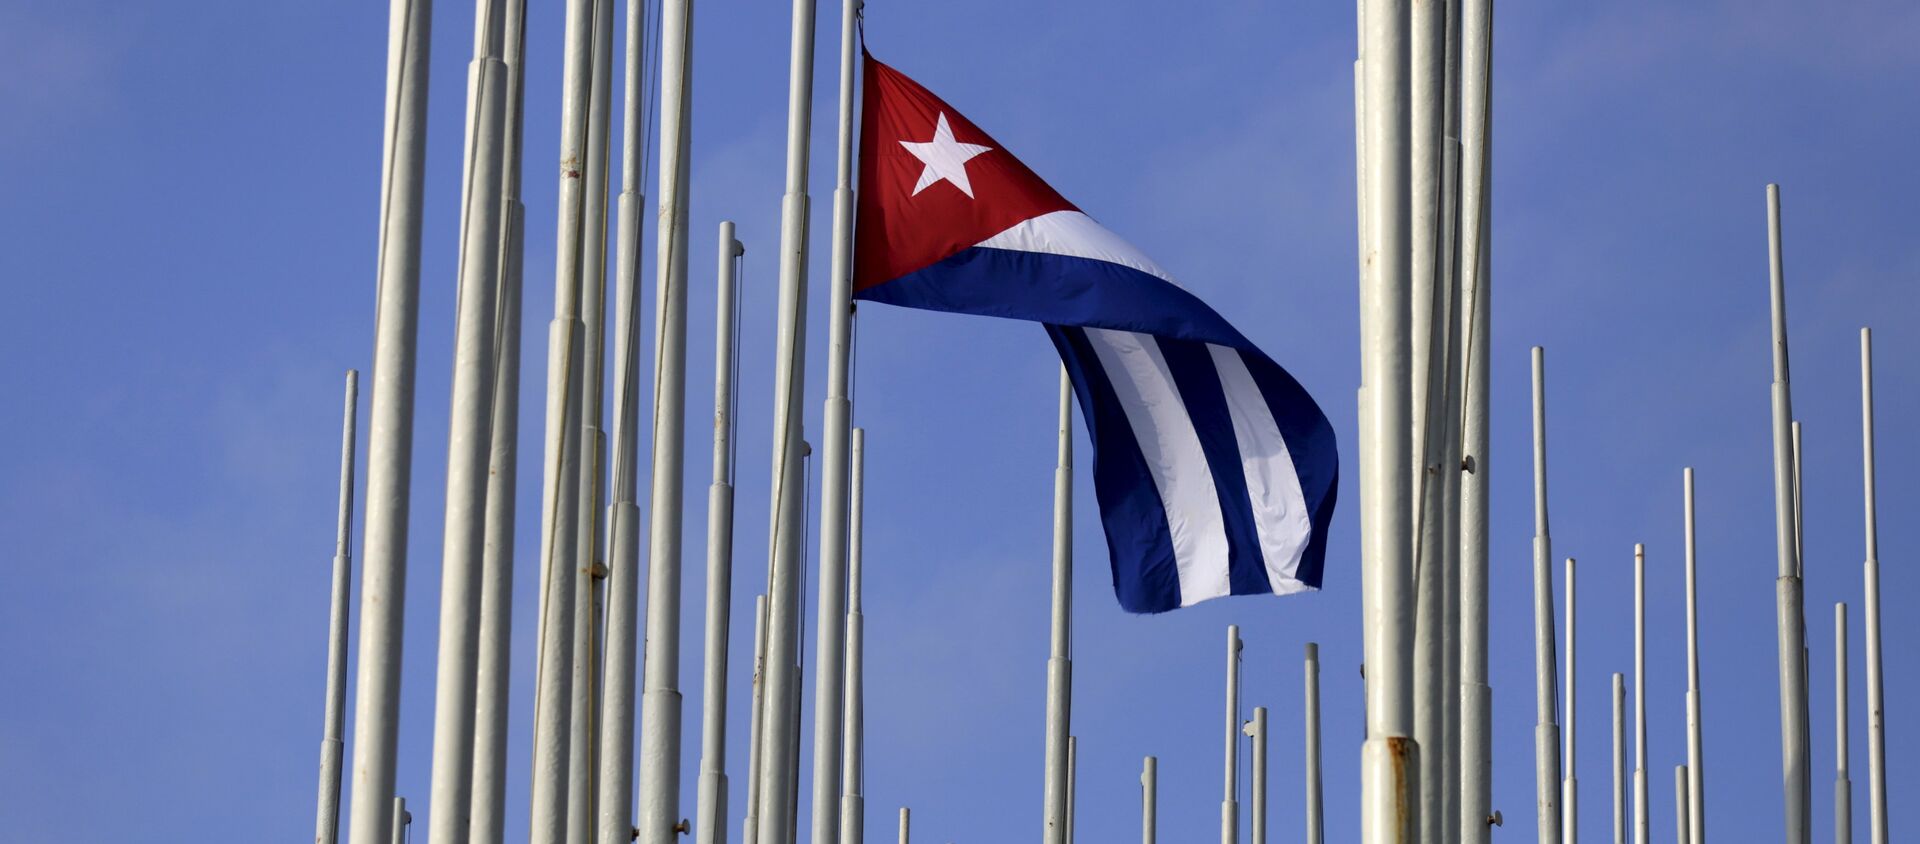 The Cuban flag flies in front of the U.S. Interests Section (background), in Havana May 22, 2015 - Sputnik Mundo, 1920, 23.12.2020